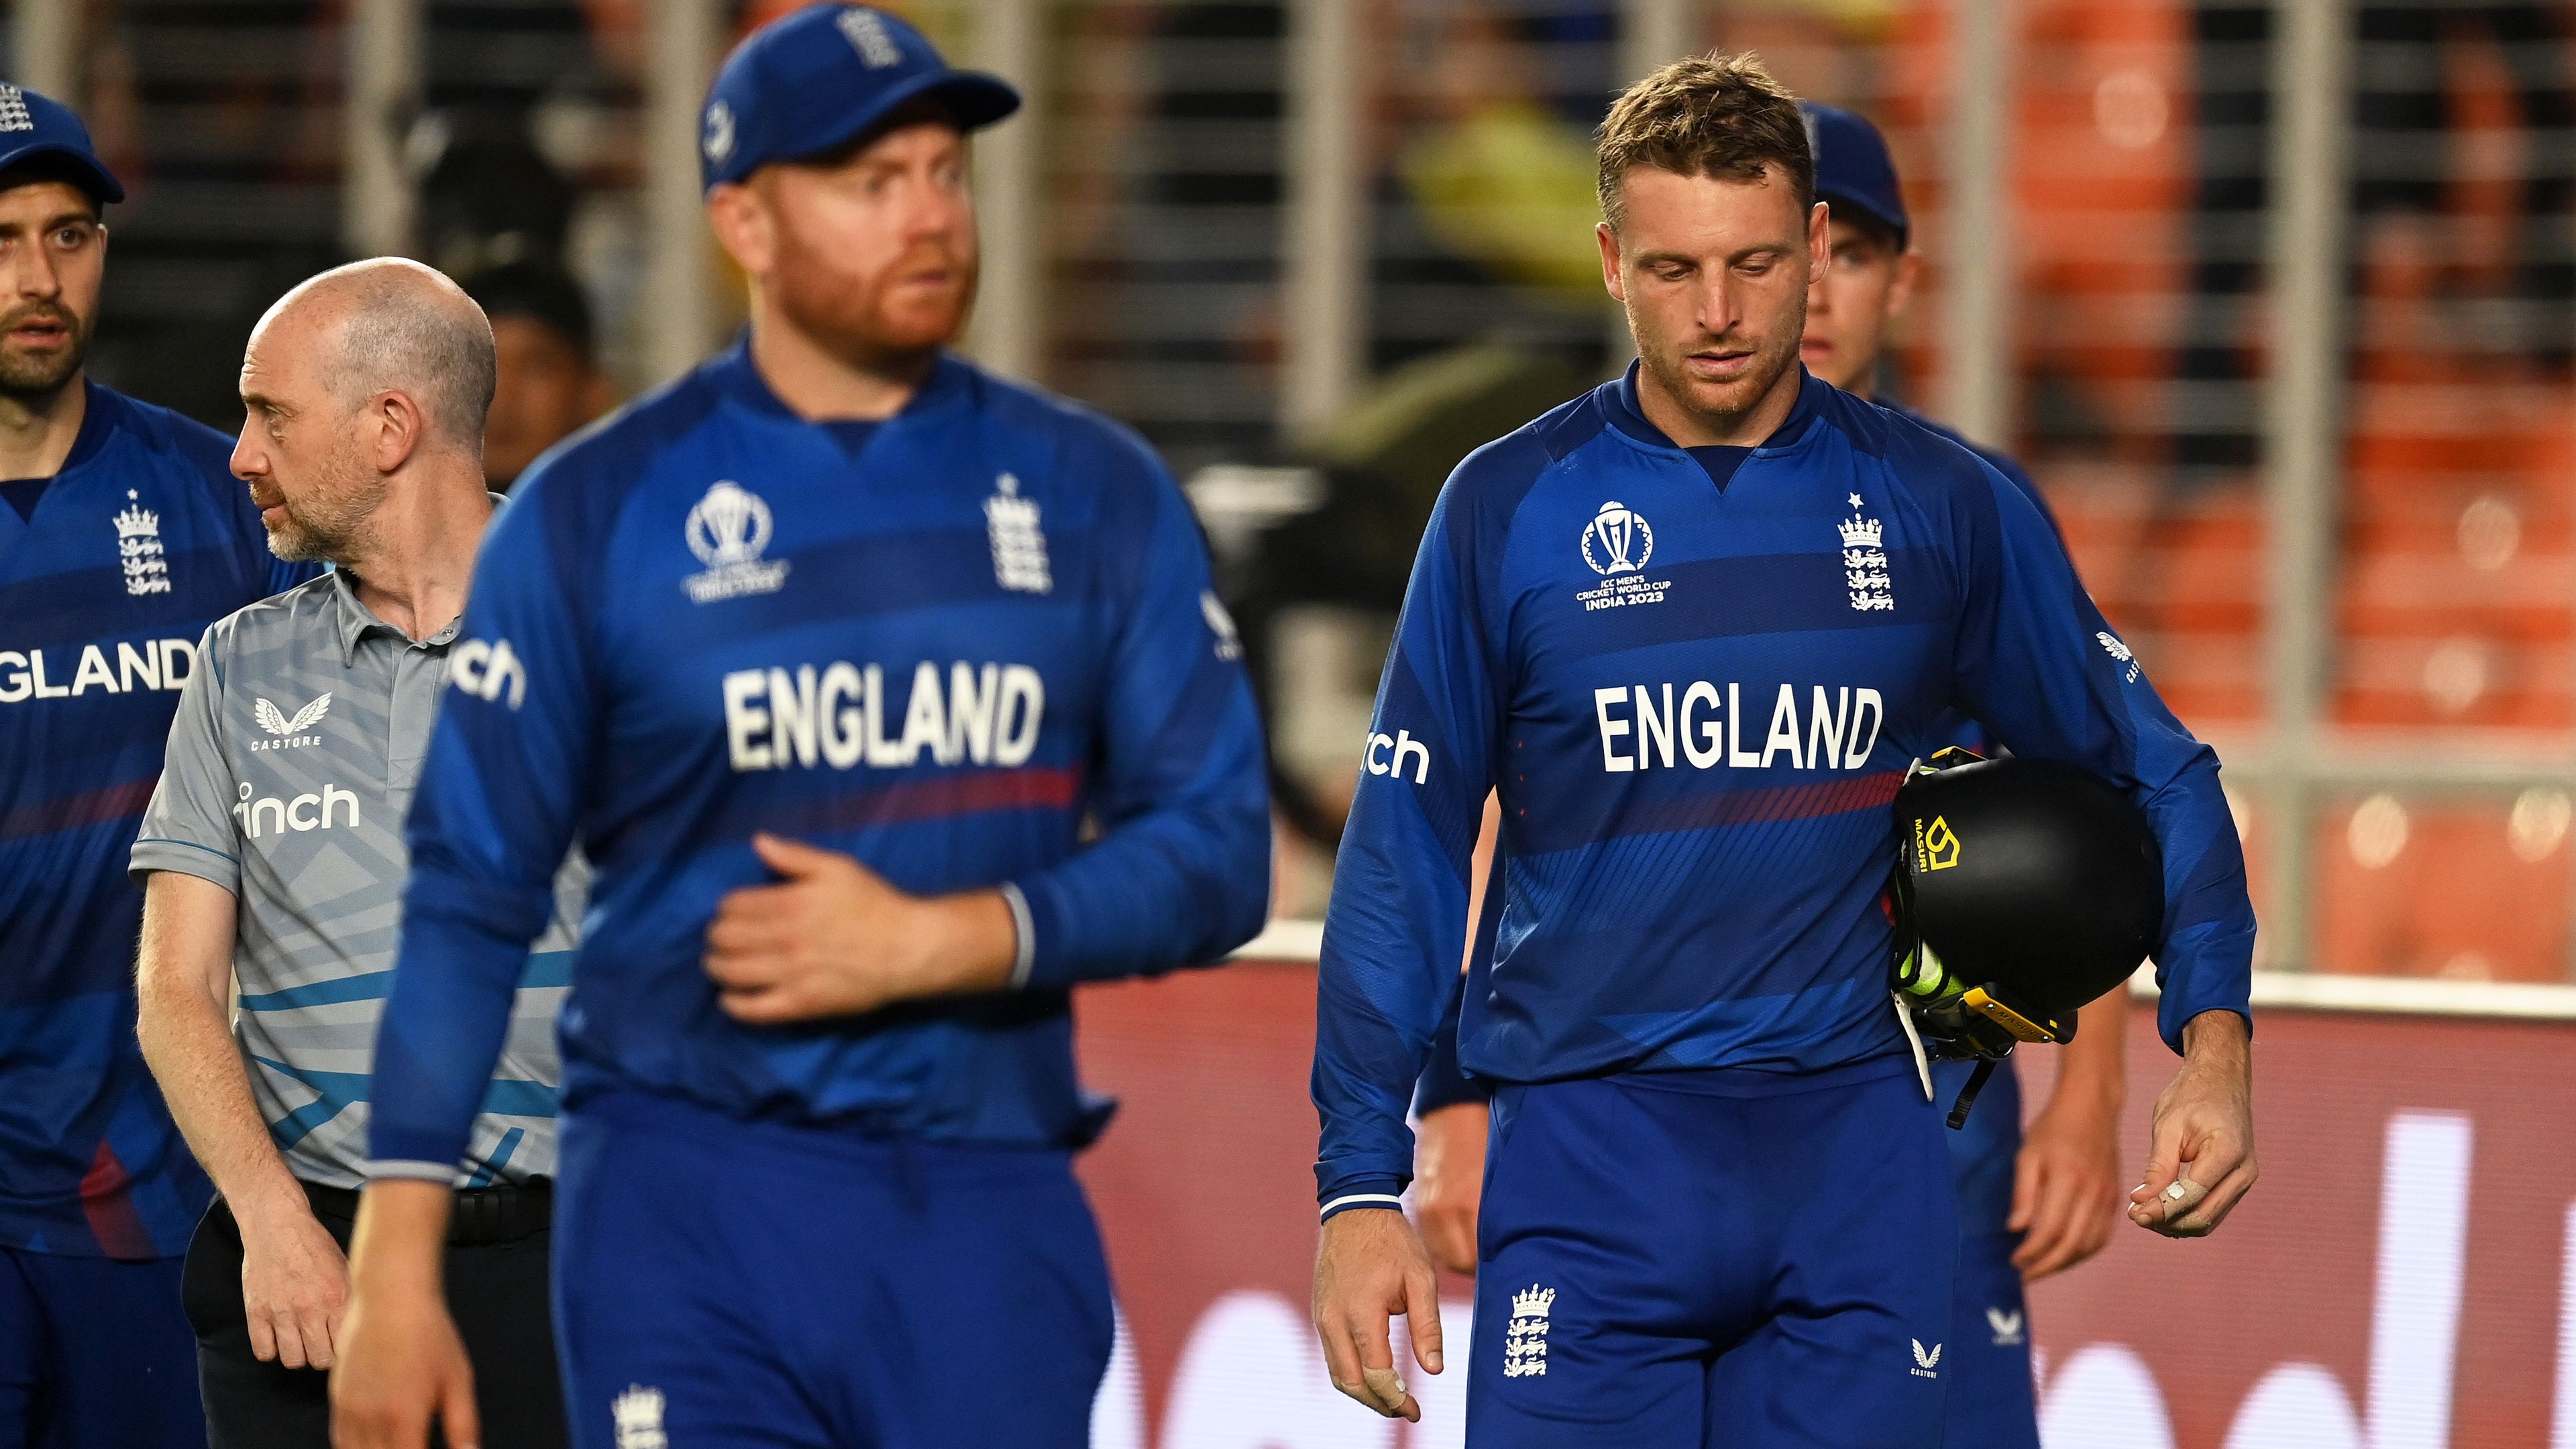 England 'horror show' lashed as legends react to World Cup shocker against New Zealand